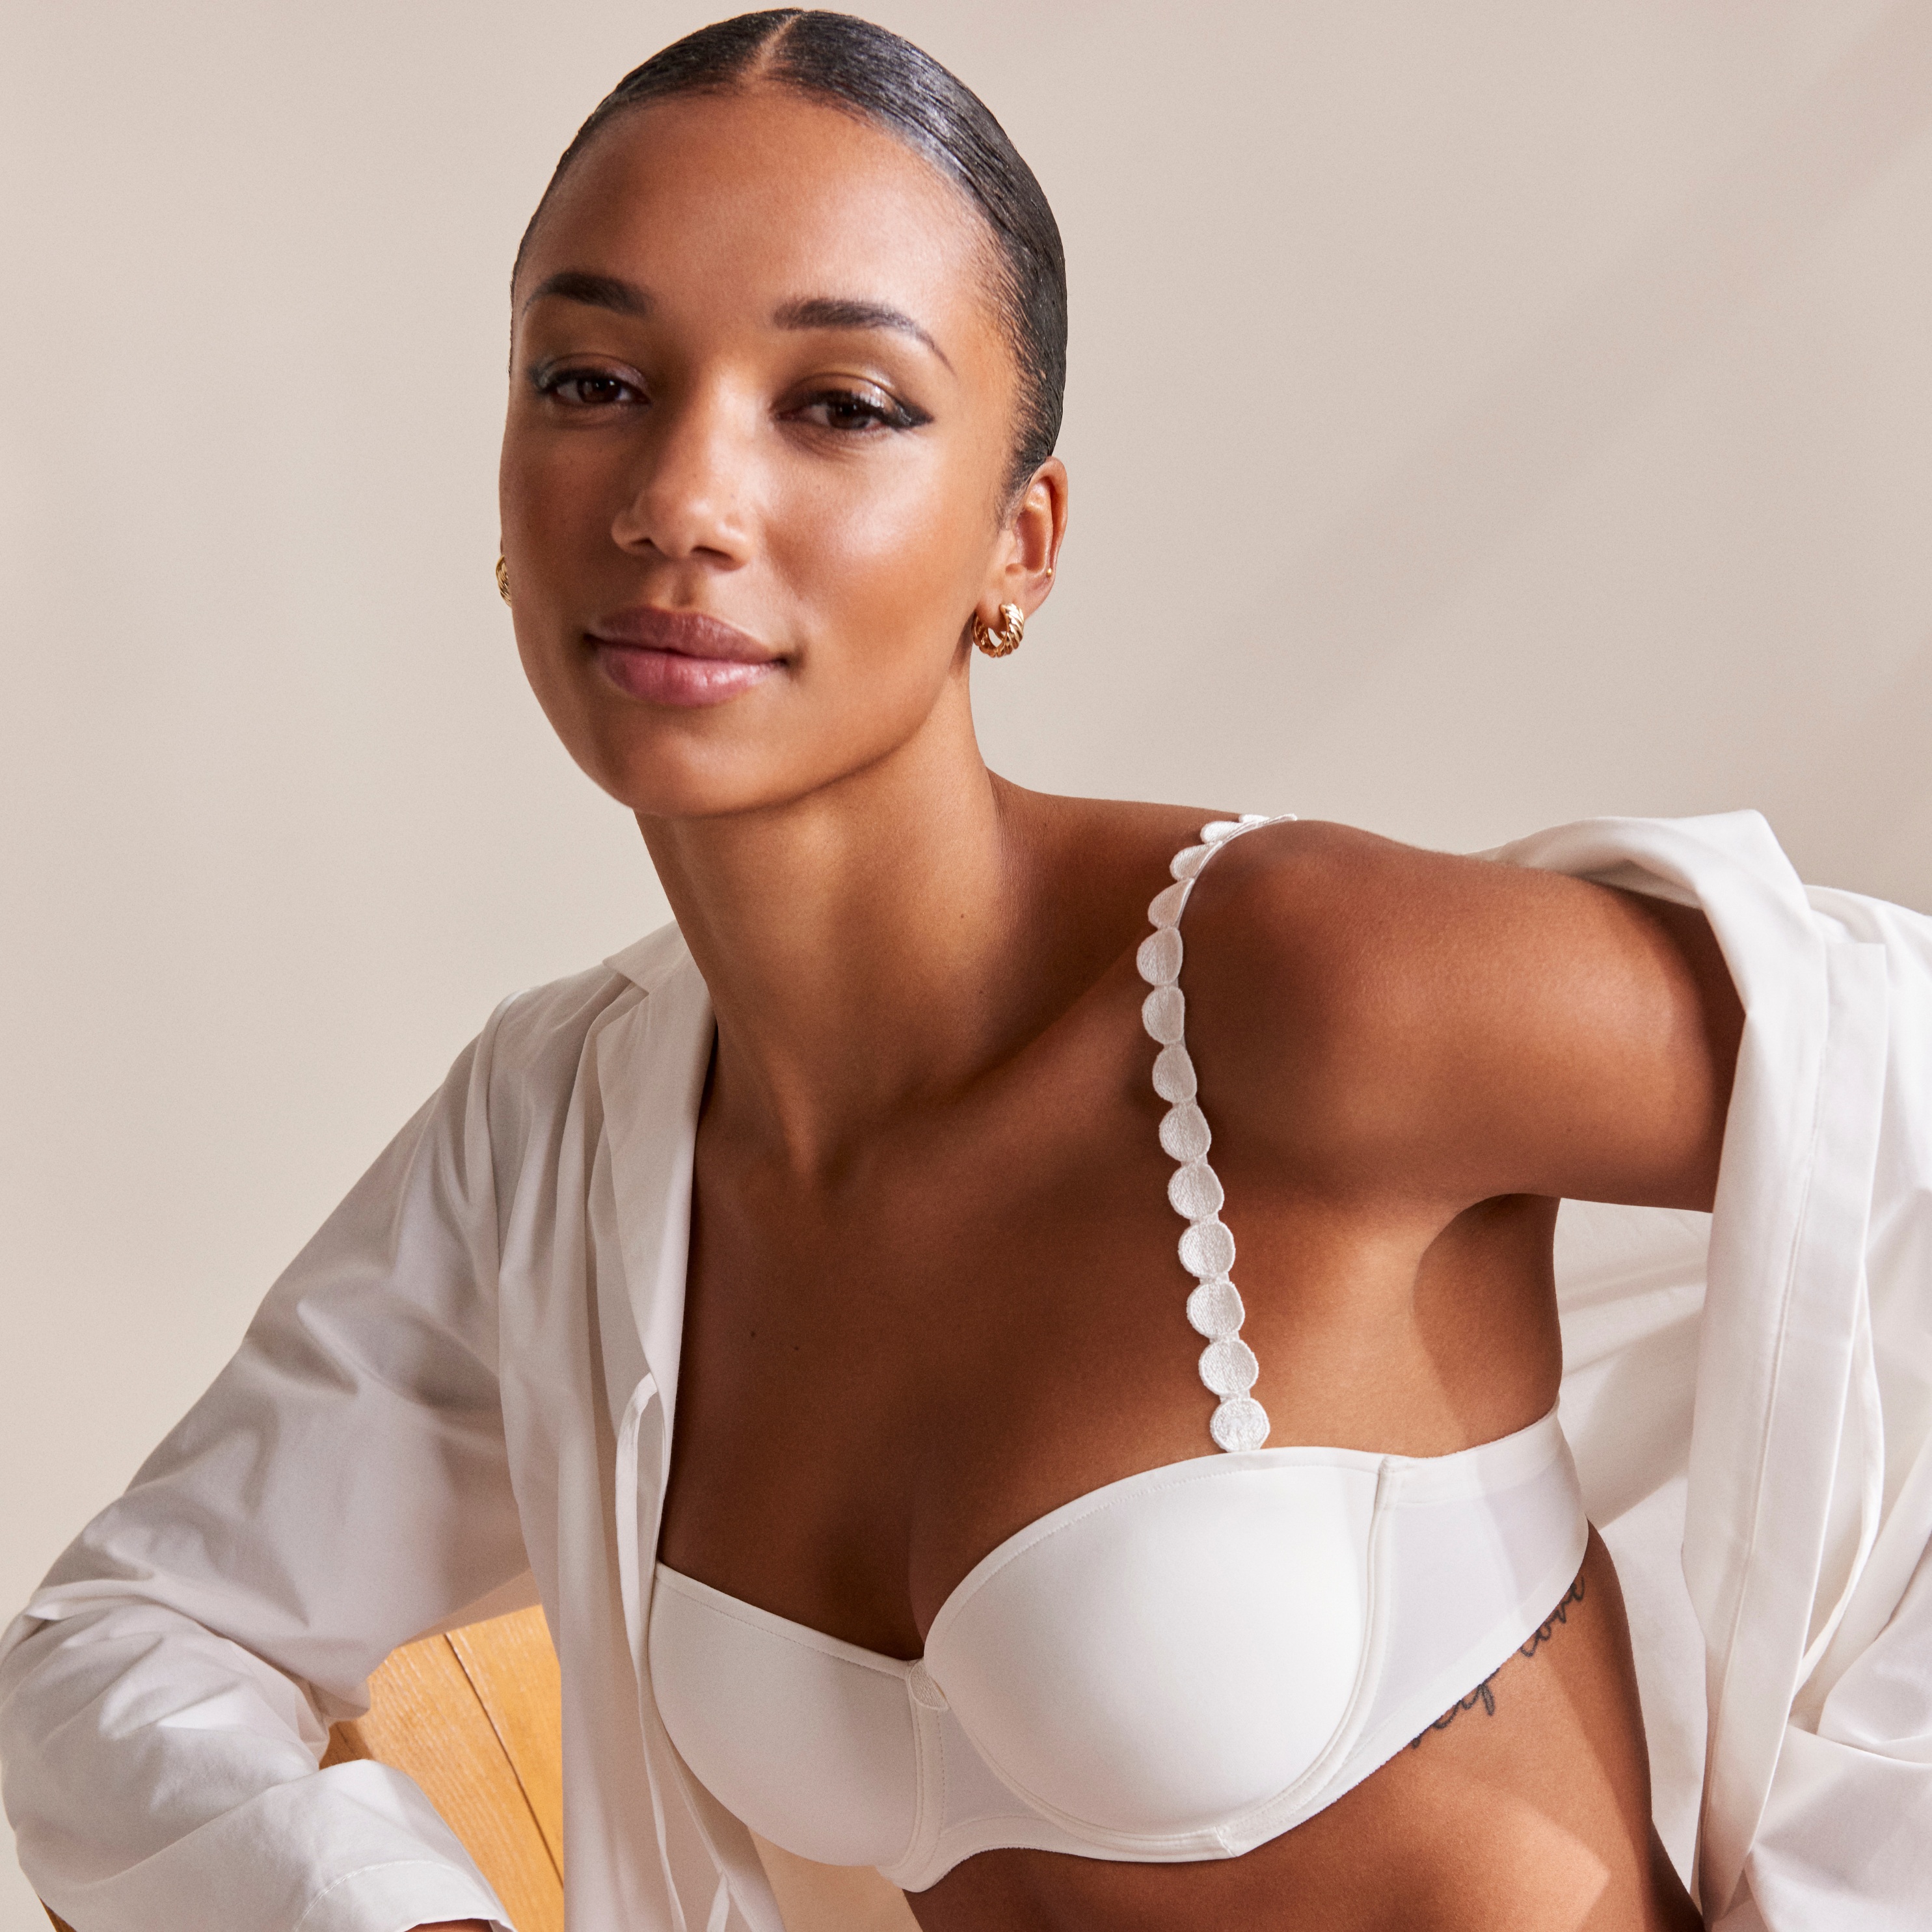 10 tips: How to build your lingerie wardrobe